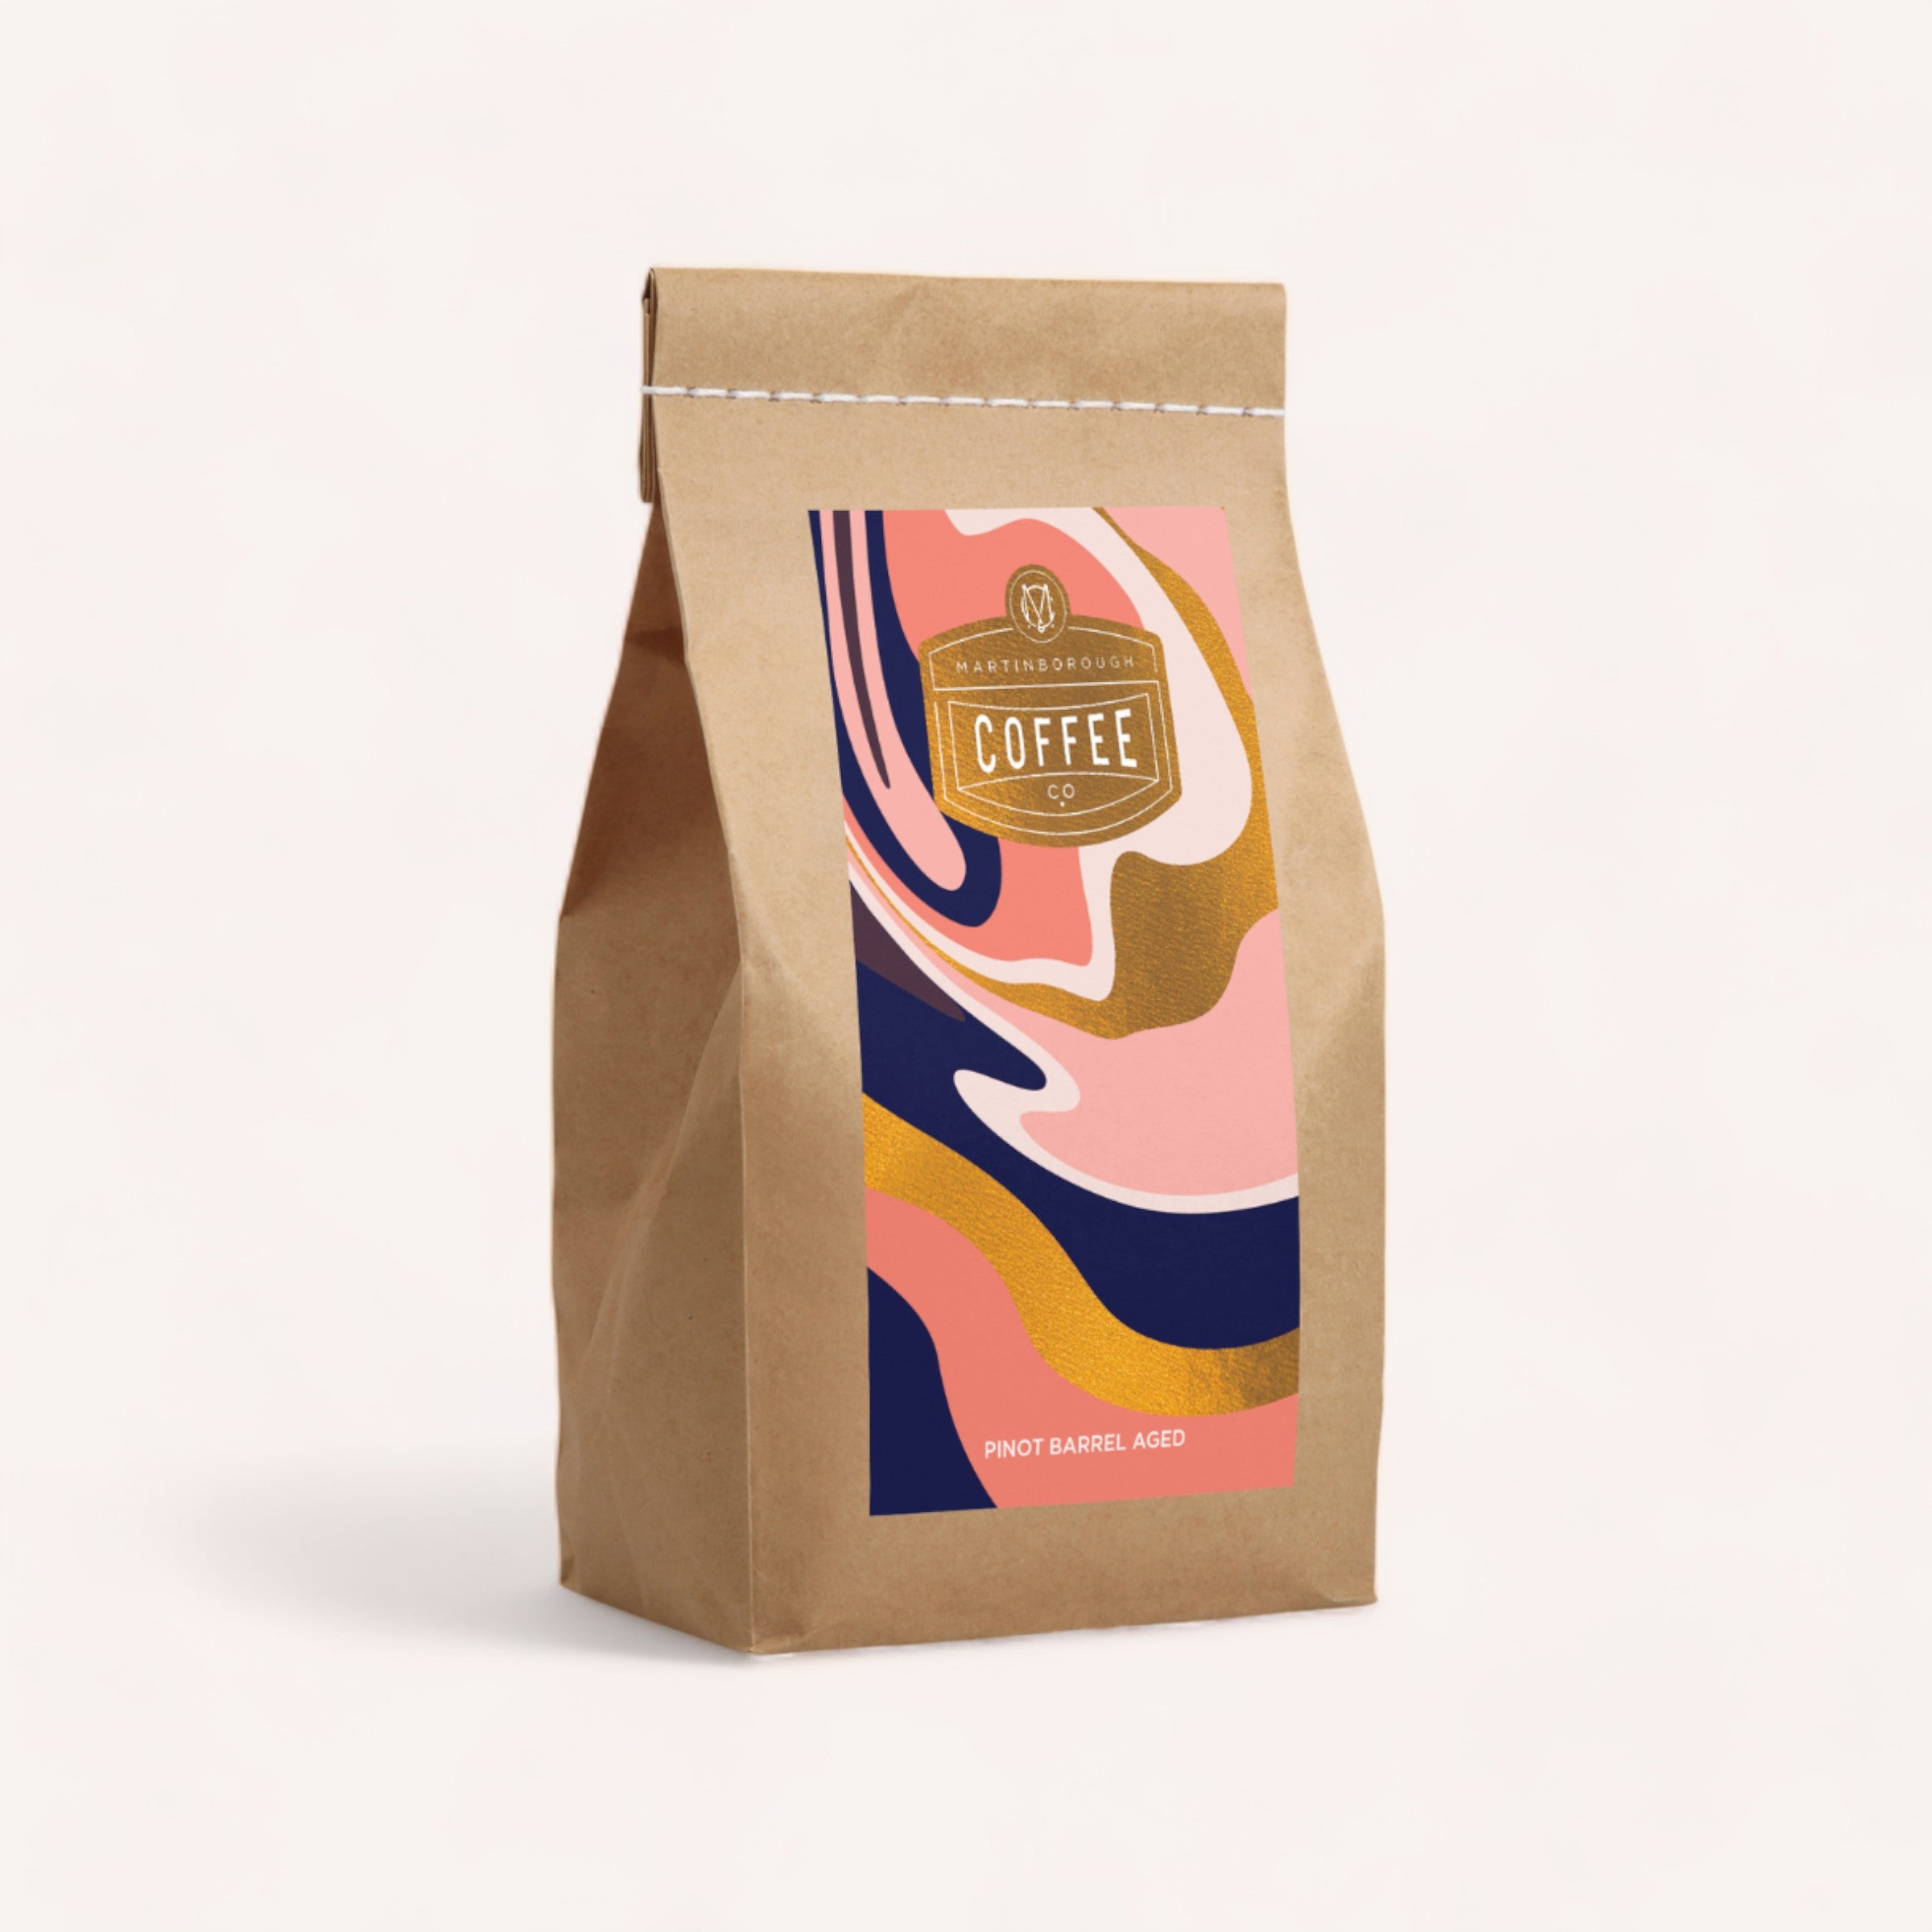 A sealed brown paper Coffee, Anyone? bag with a colorful wavy design and a label indicating "Martinborough pinot aged" coffee.